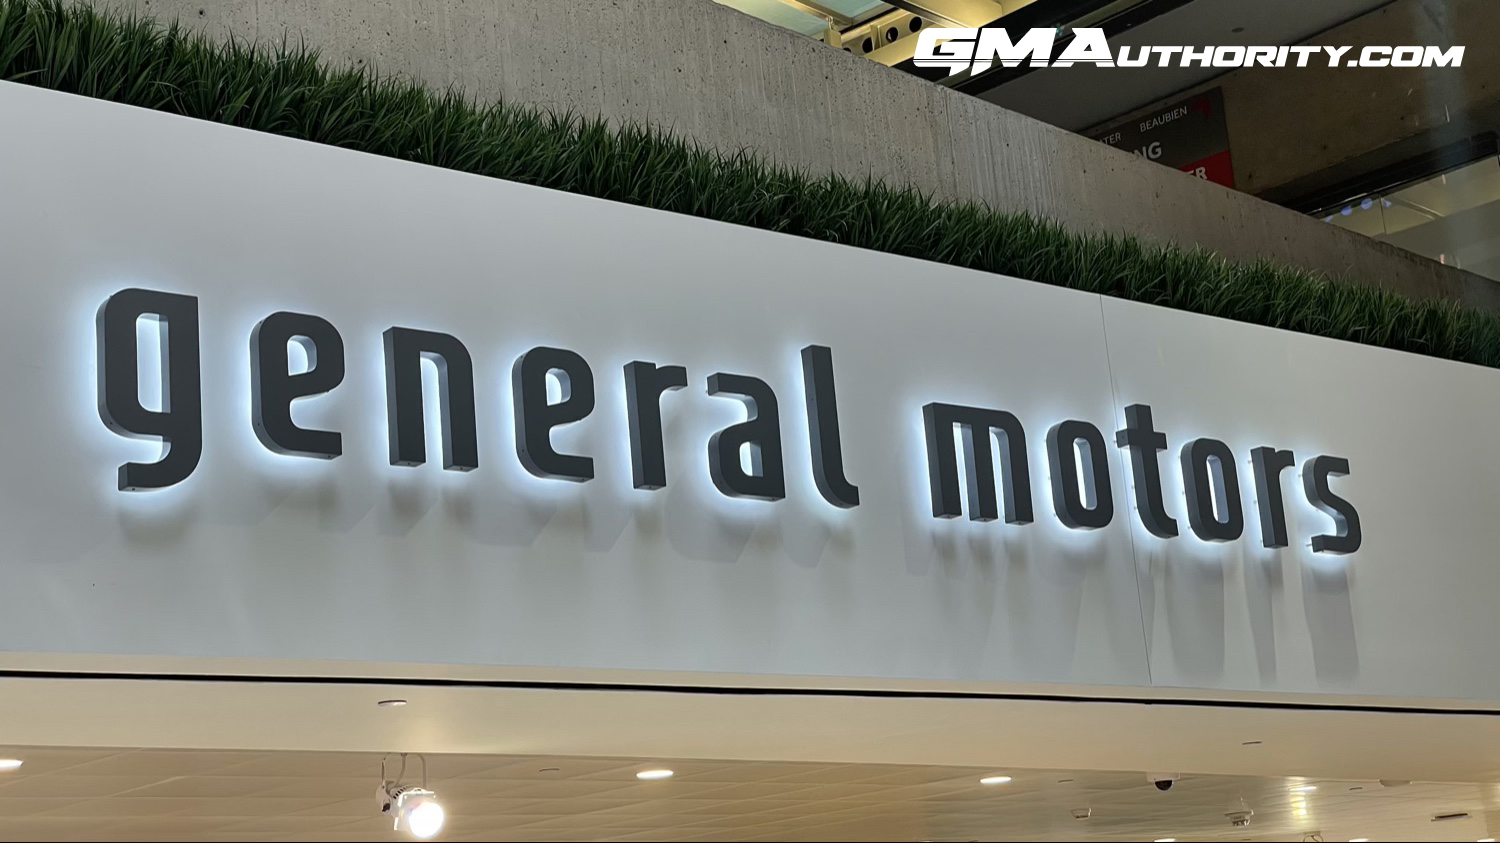 GM Searching For New Global Marketing Director